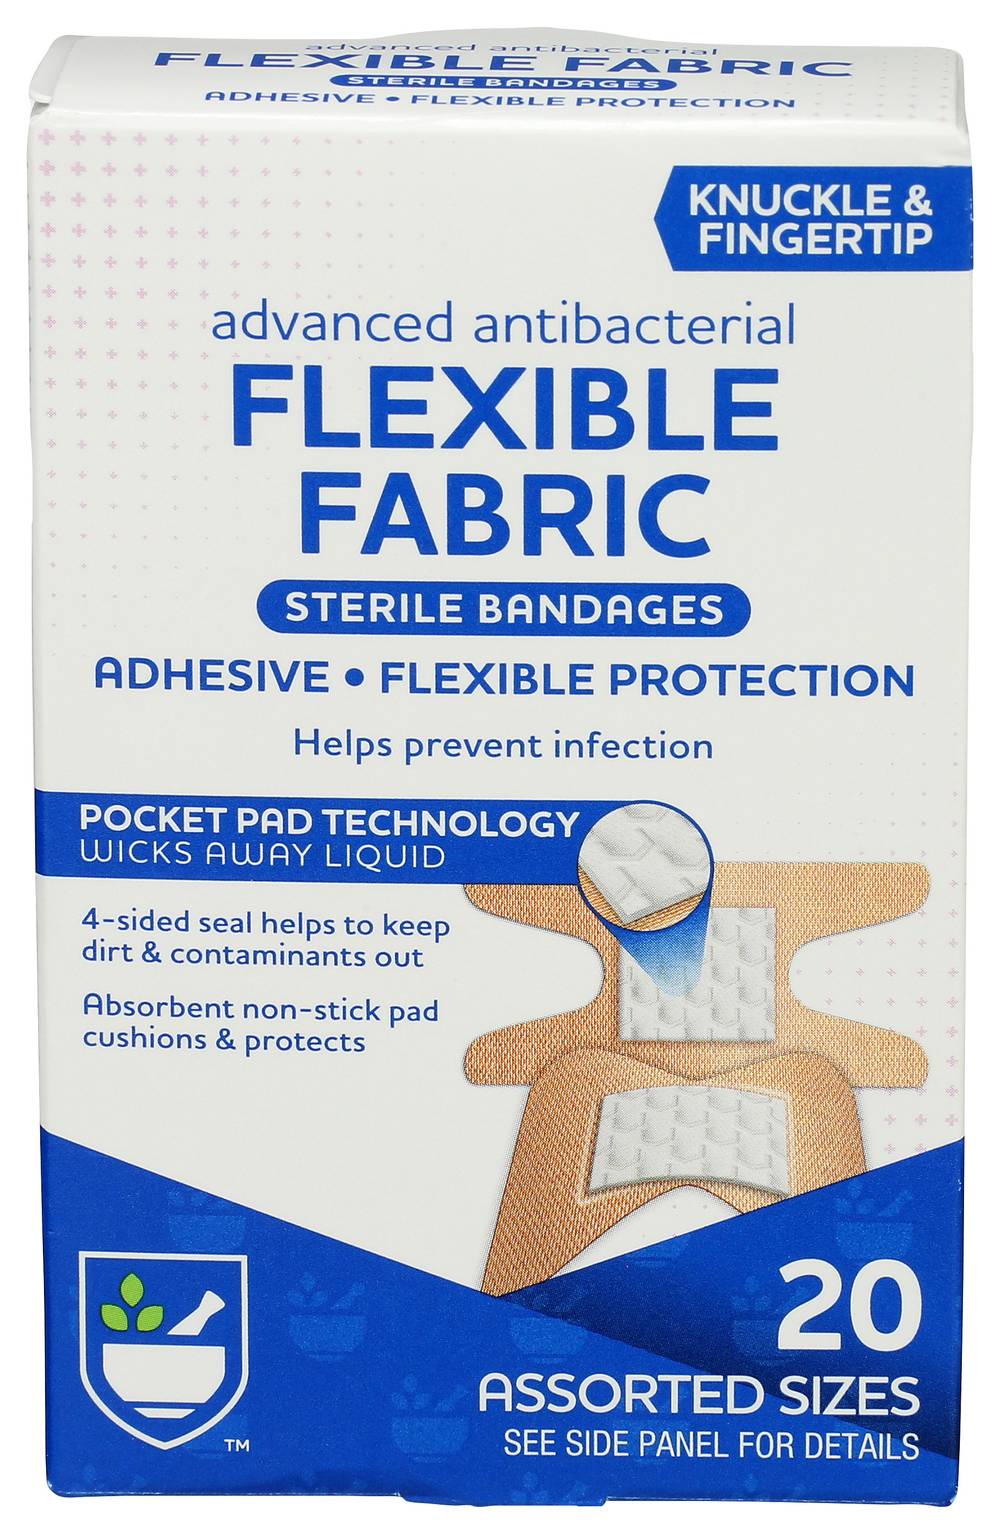 Rite Aid First Aid Advanced Antibacterial Fabric Adhesive Bandages Knuckle & Fingertip Assorted Sizes (20 ct)